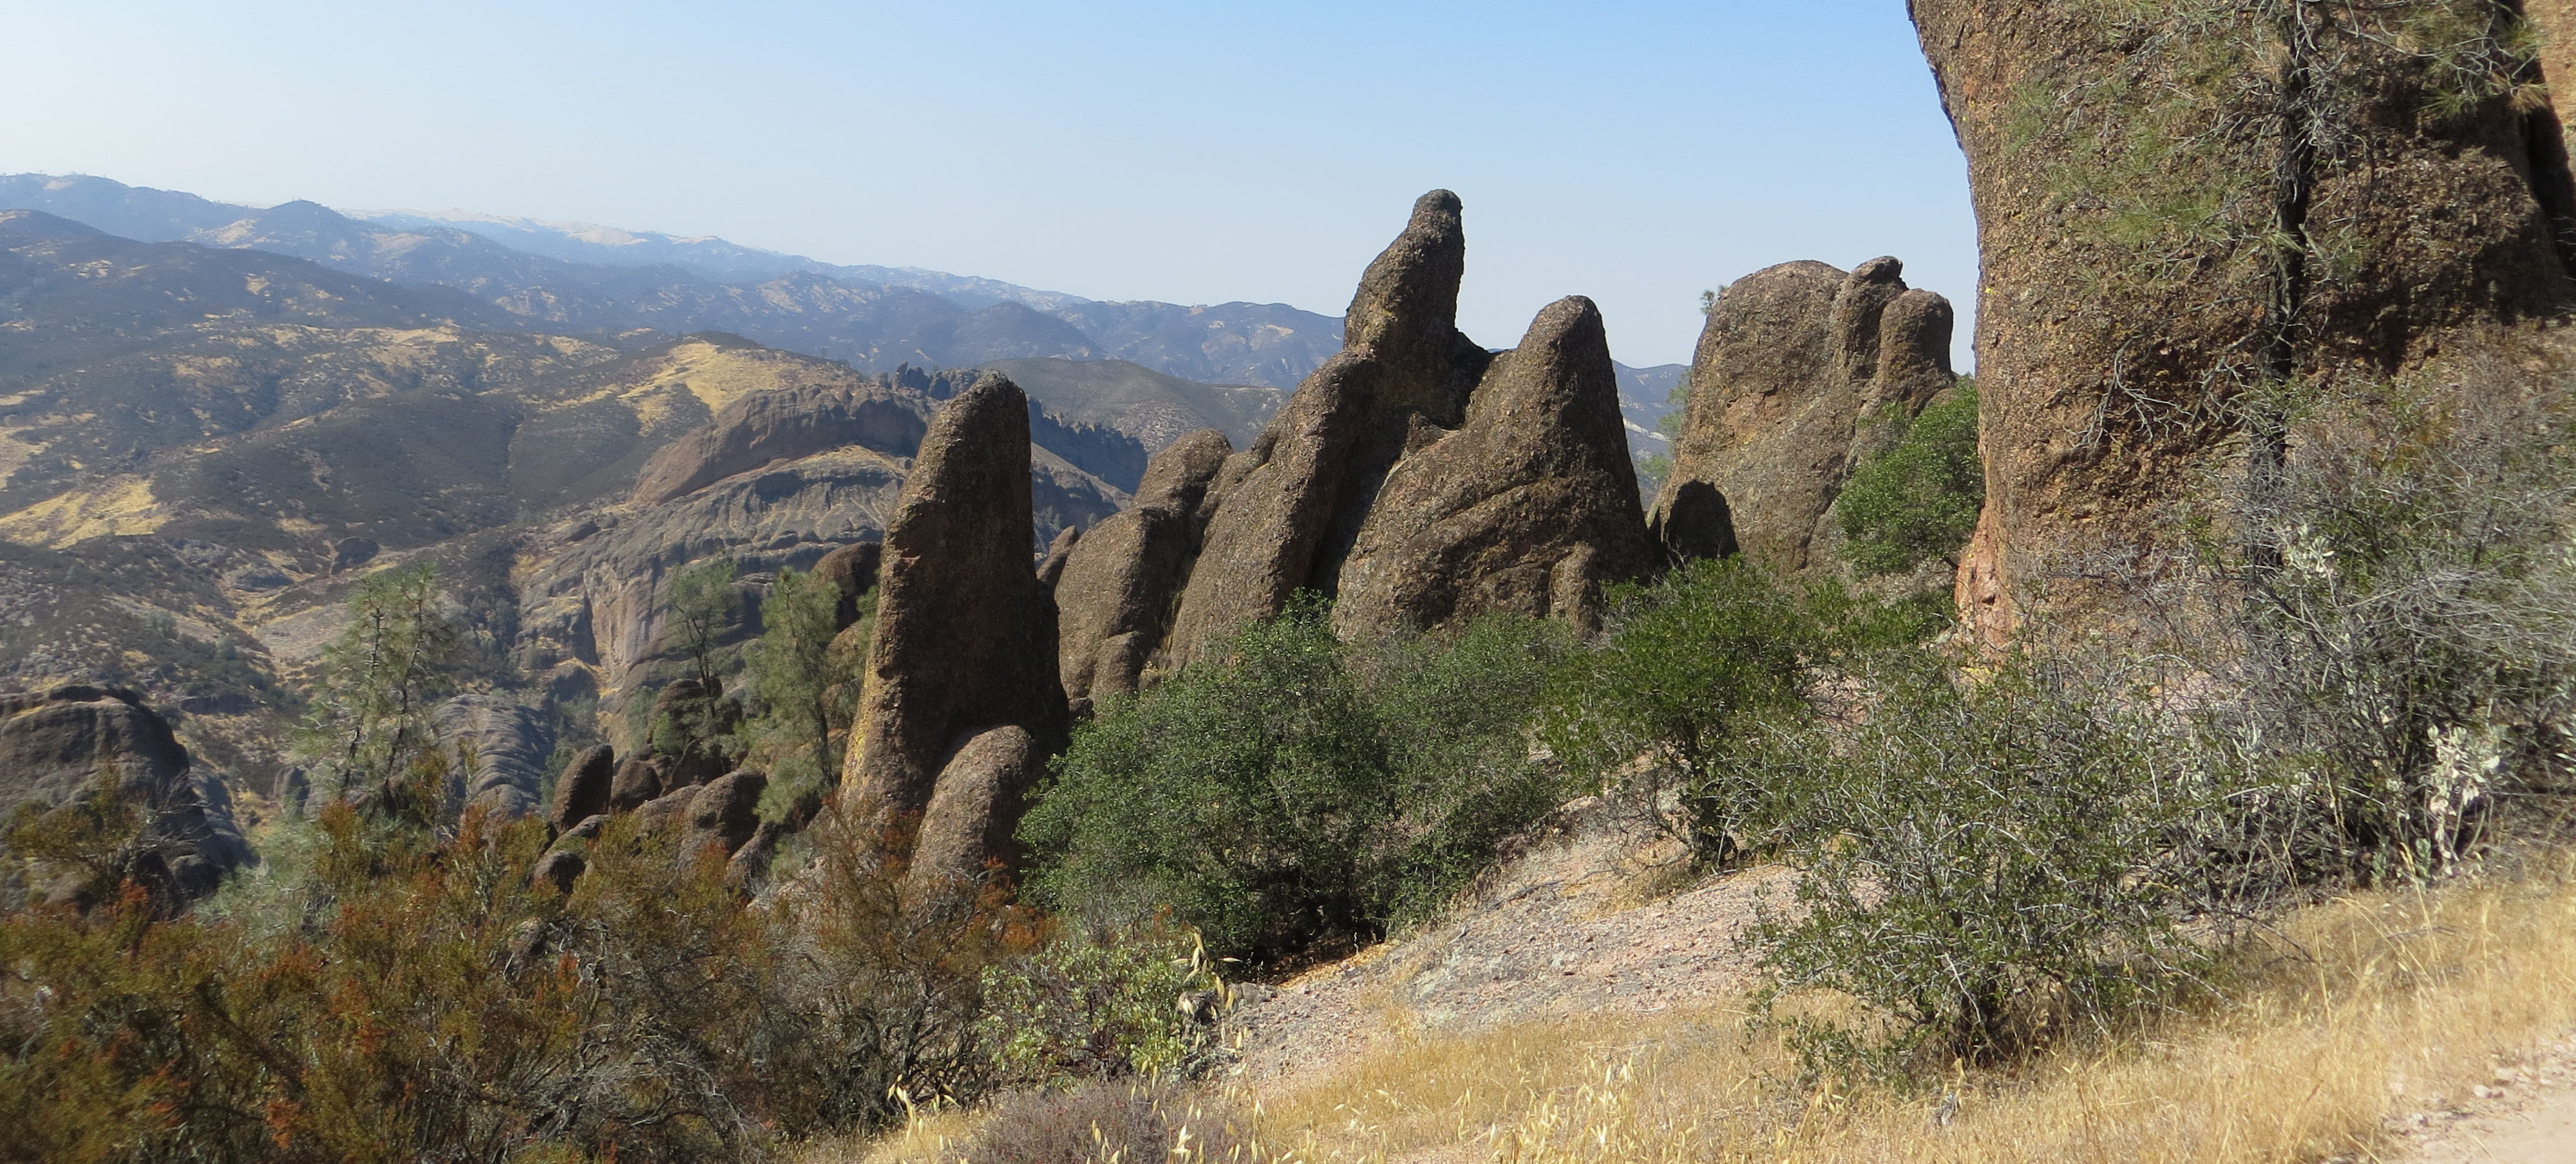 California Volcanic Mountains Iron on Pinnacles National Park Patch 